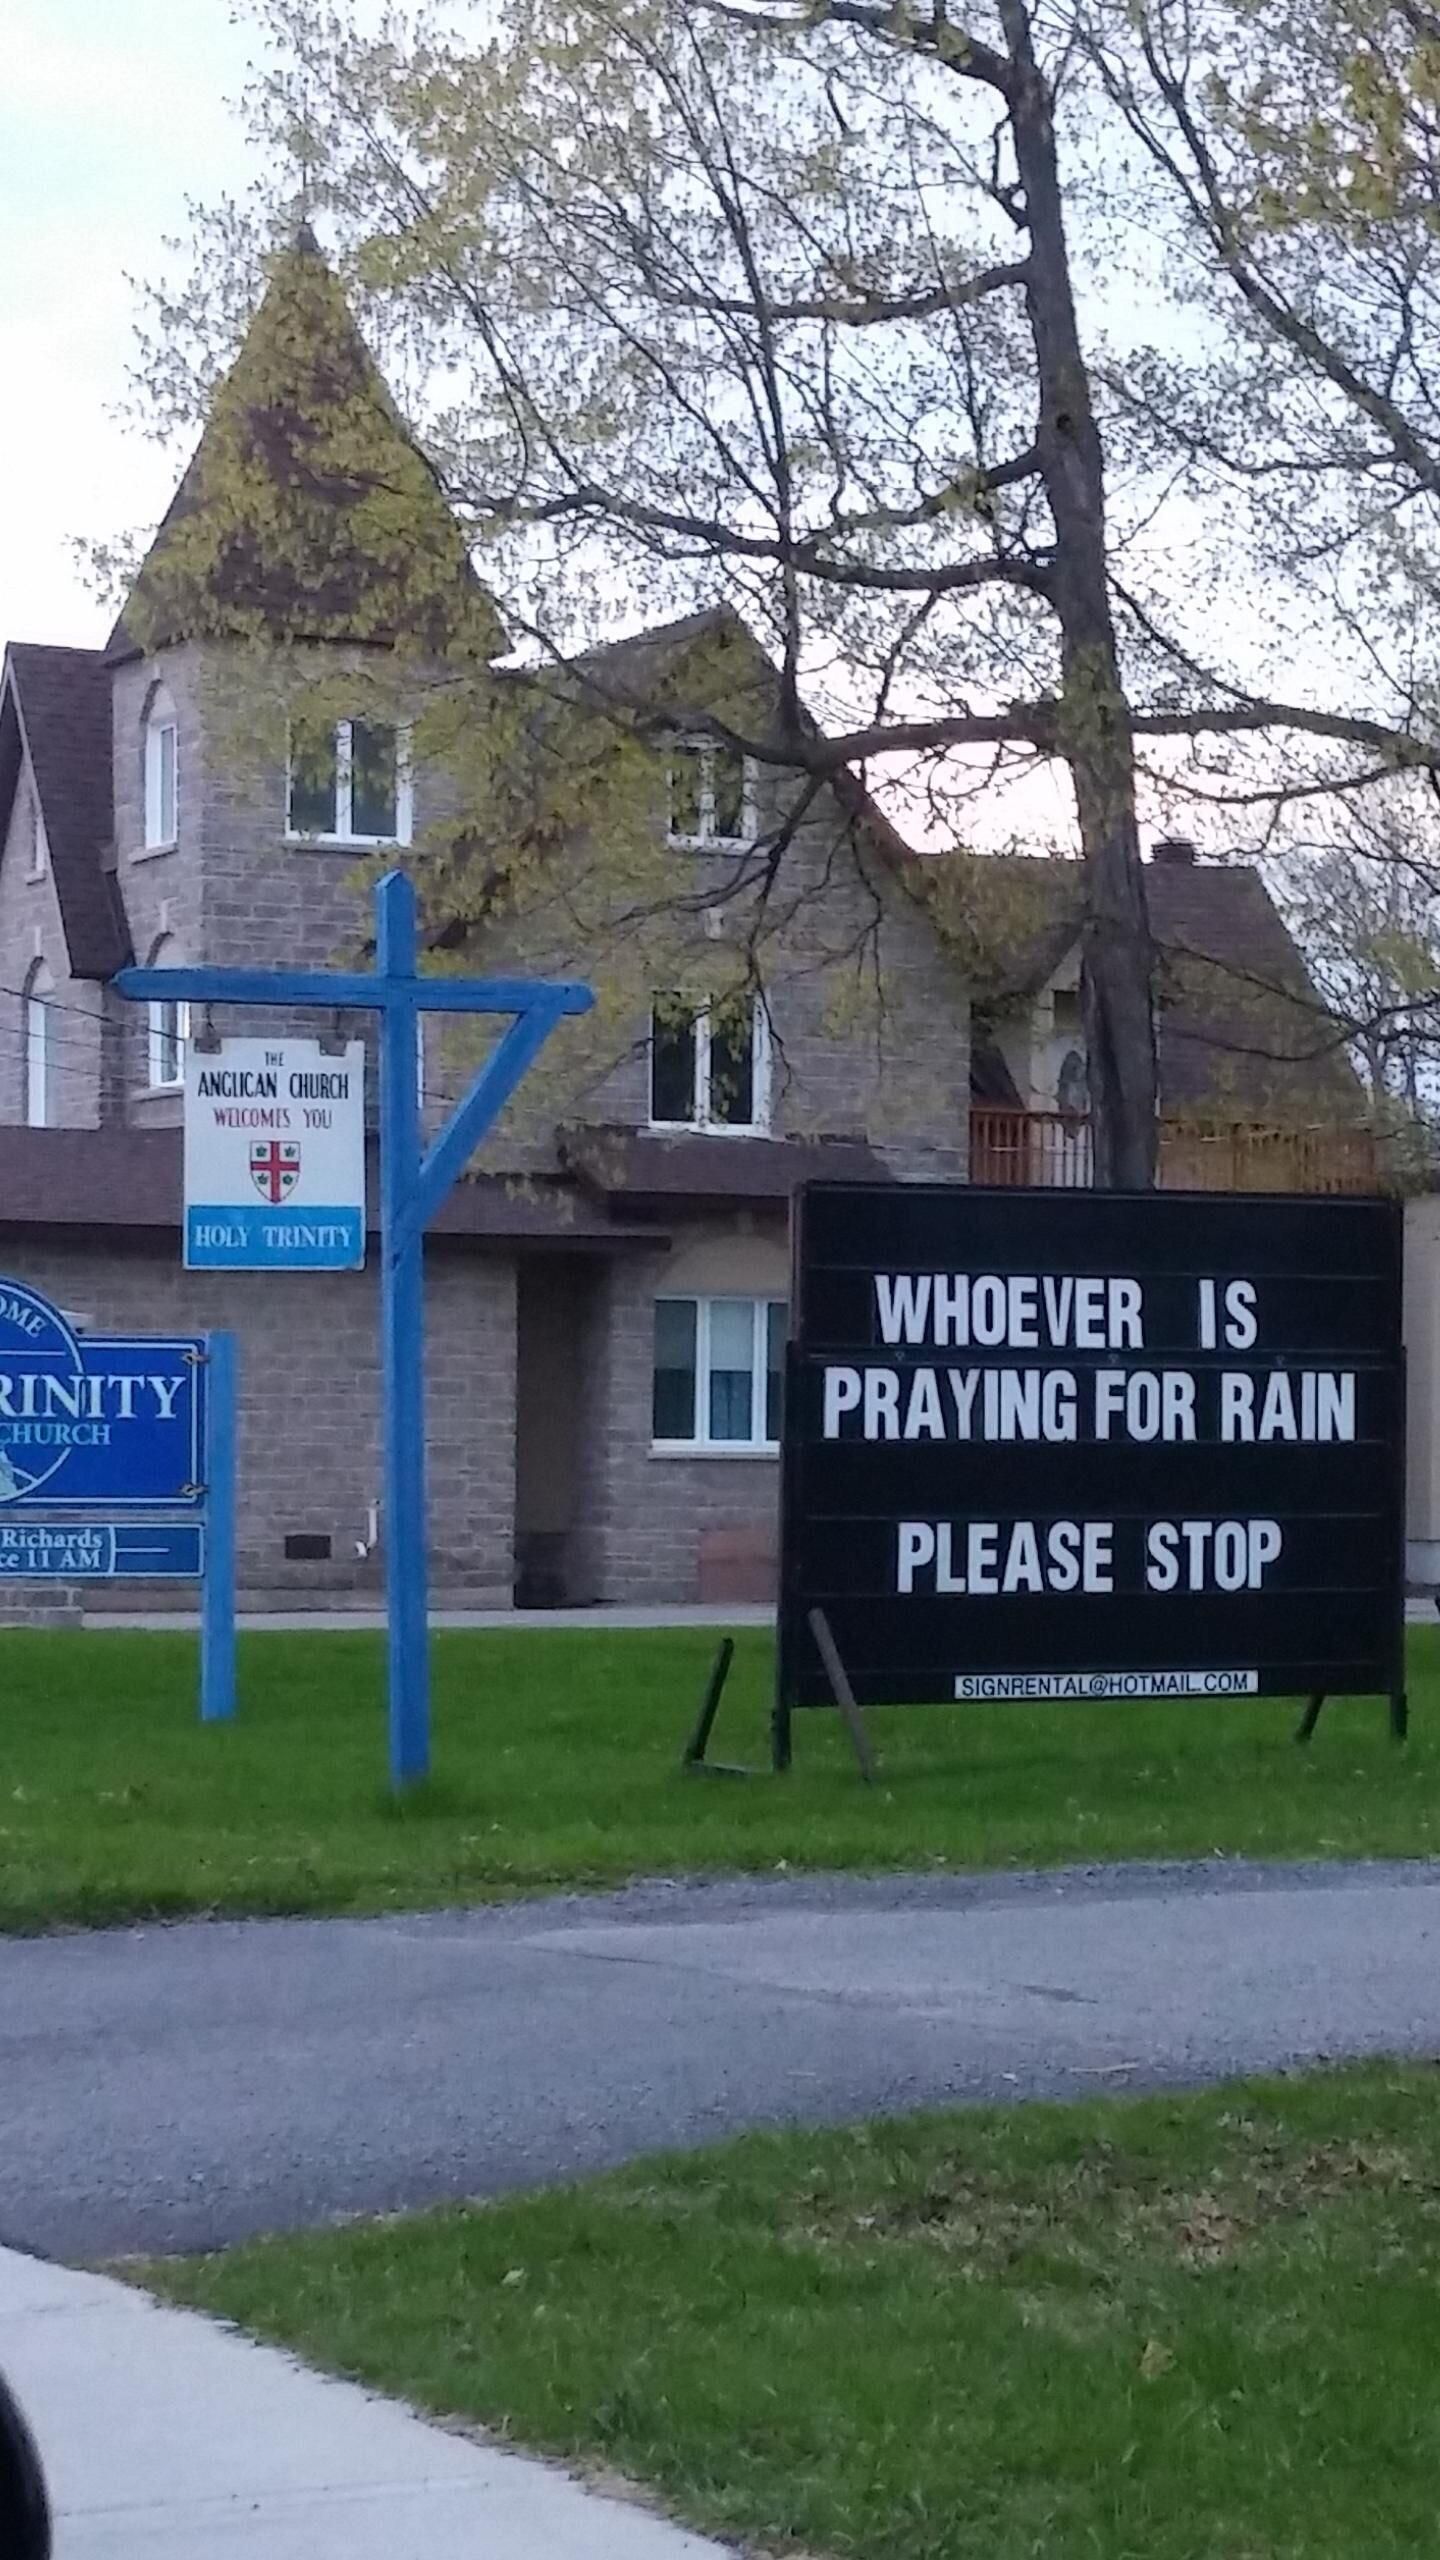 In response to the flooding happening in parts of eastern Canada.